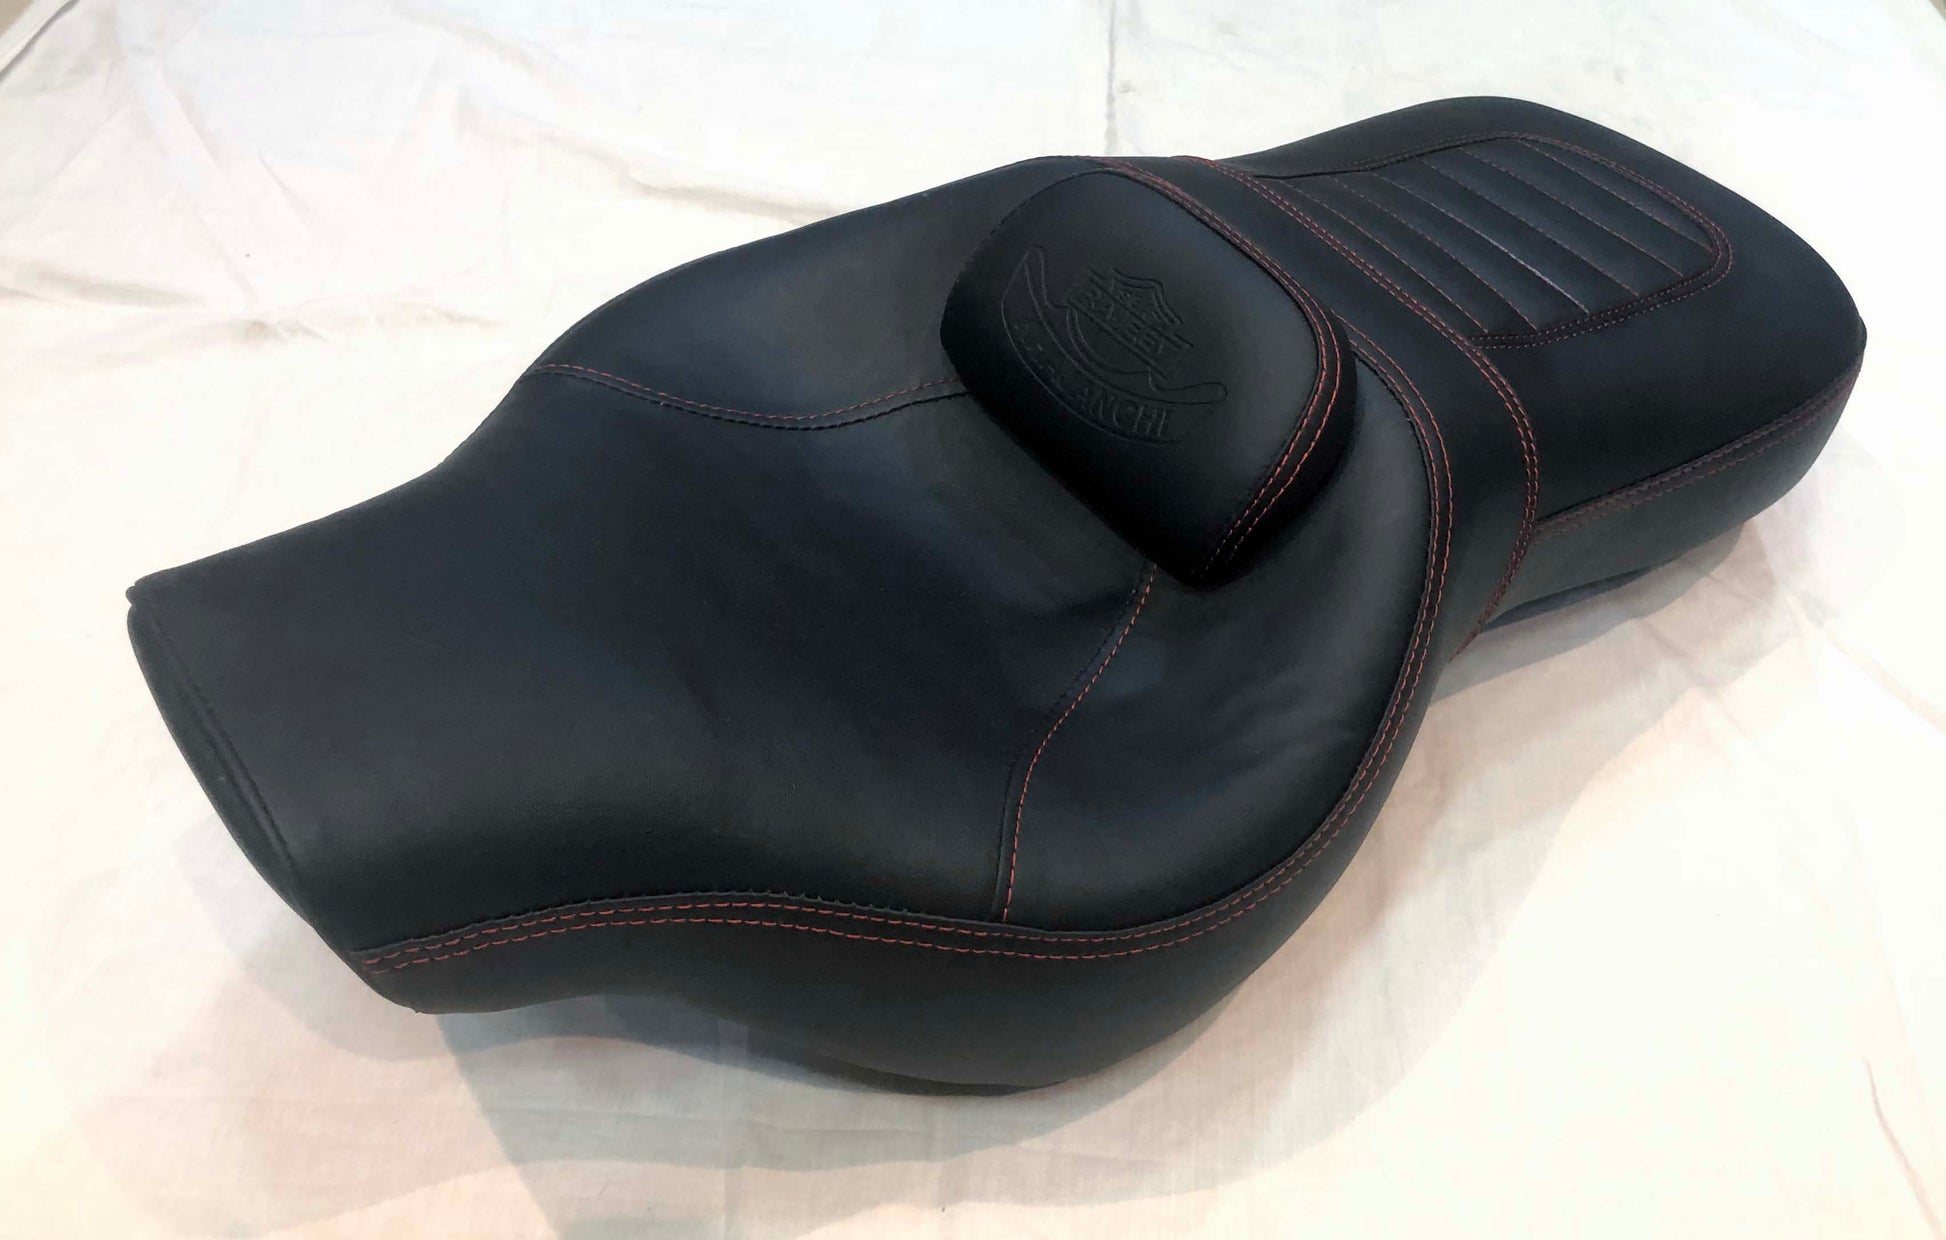 Broad Seat with Cushion for Rider - Premium Seats from Sparewick - Just Rs. 3900! Shop now at Sparewick